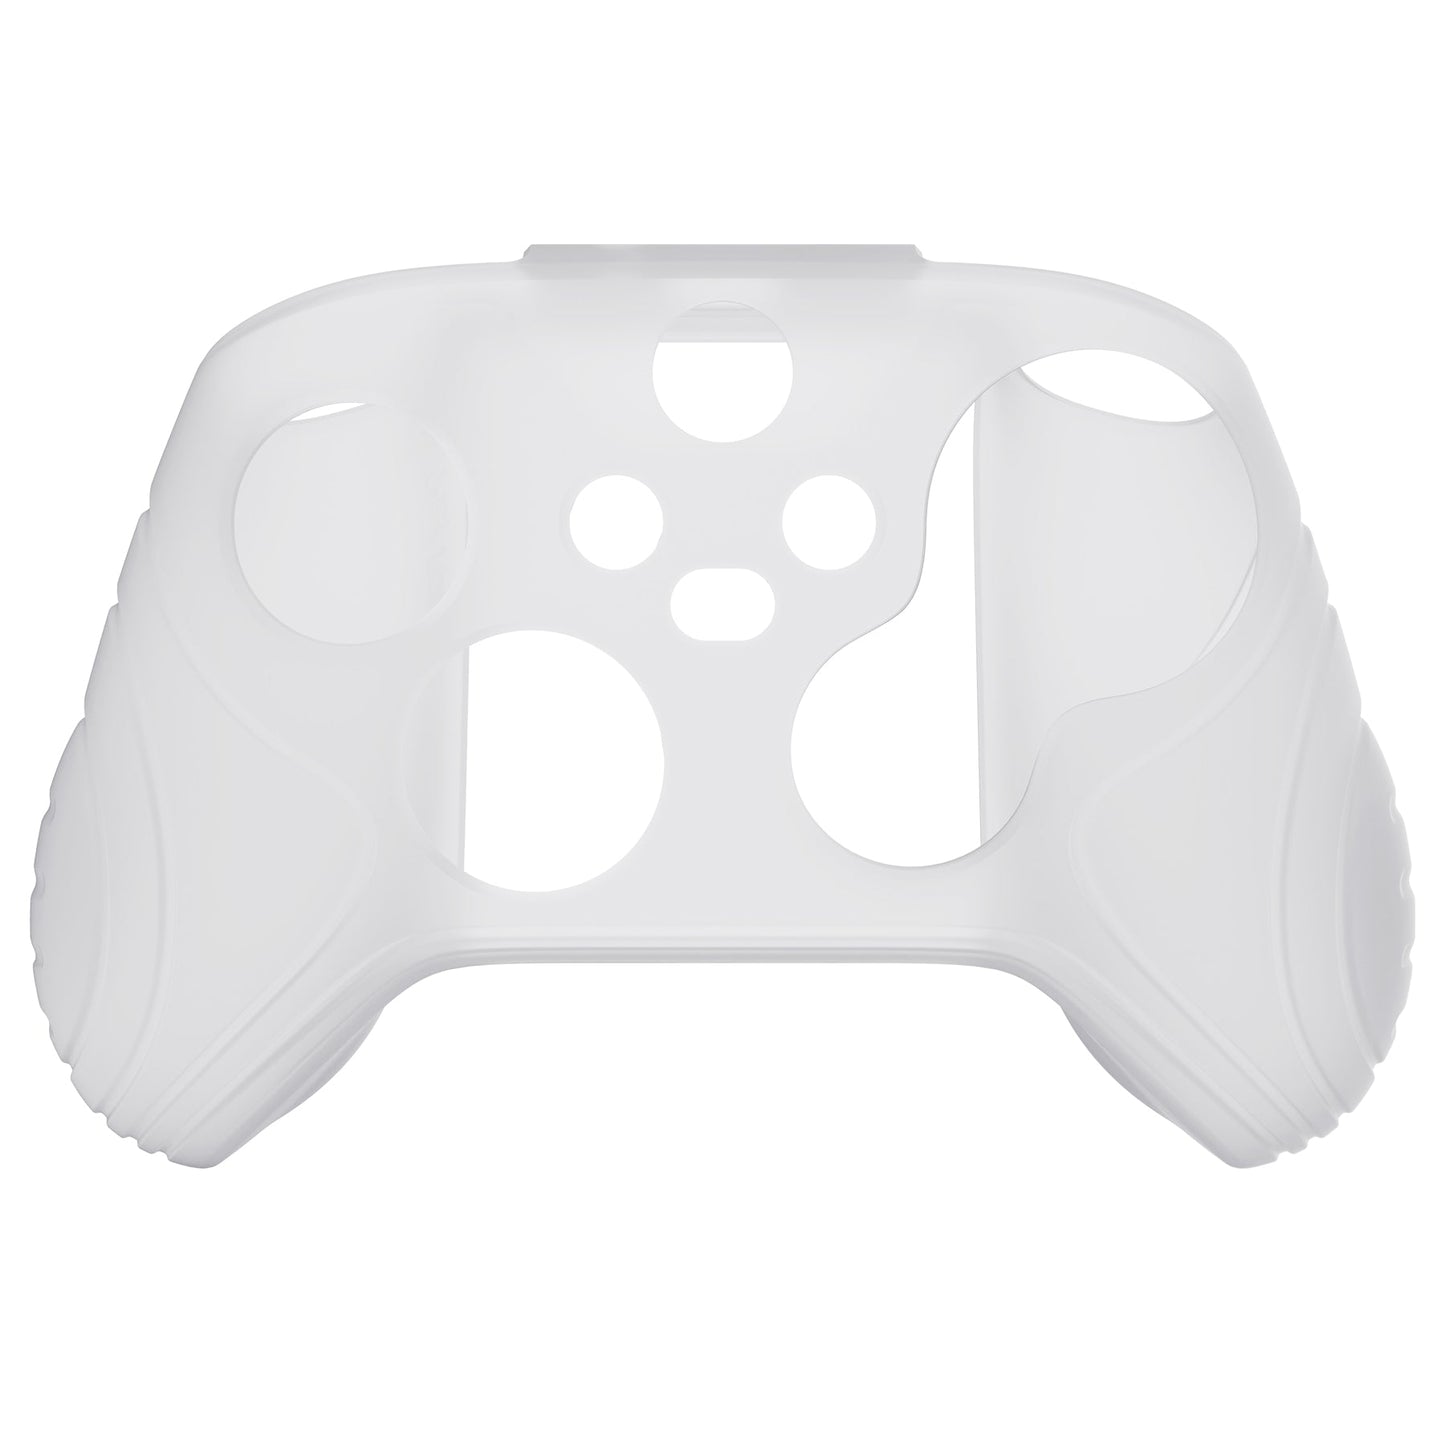 PlayVital Samurai Edition Clear White Anti-slip Controller Grip Silicone Skin, Ergonomic Soft Rubber Protective Case Cover for Xbox Series S/X Controller with Clear White Thumb Stick Caps - WAX3012 PlayVital